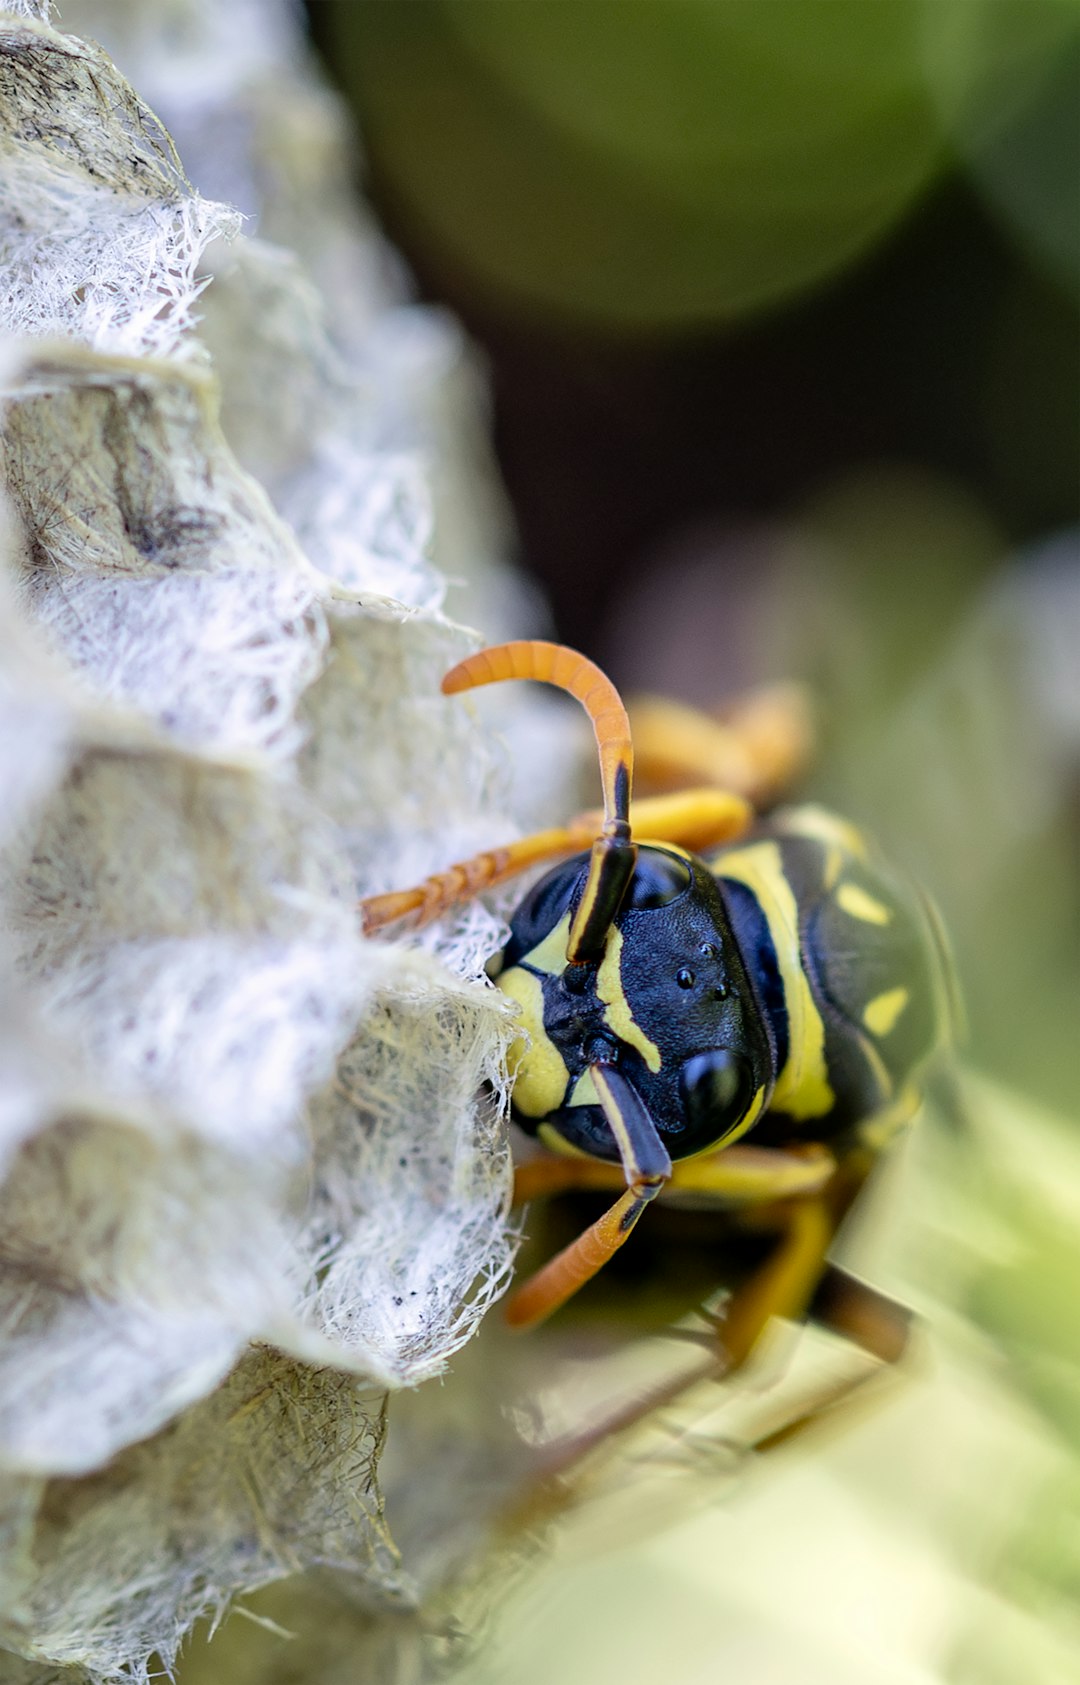 A wasp building its nest.